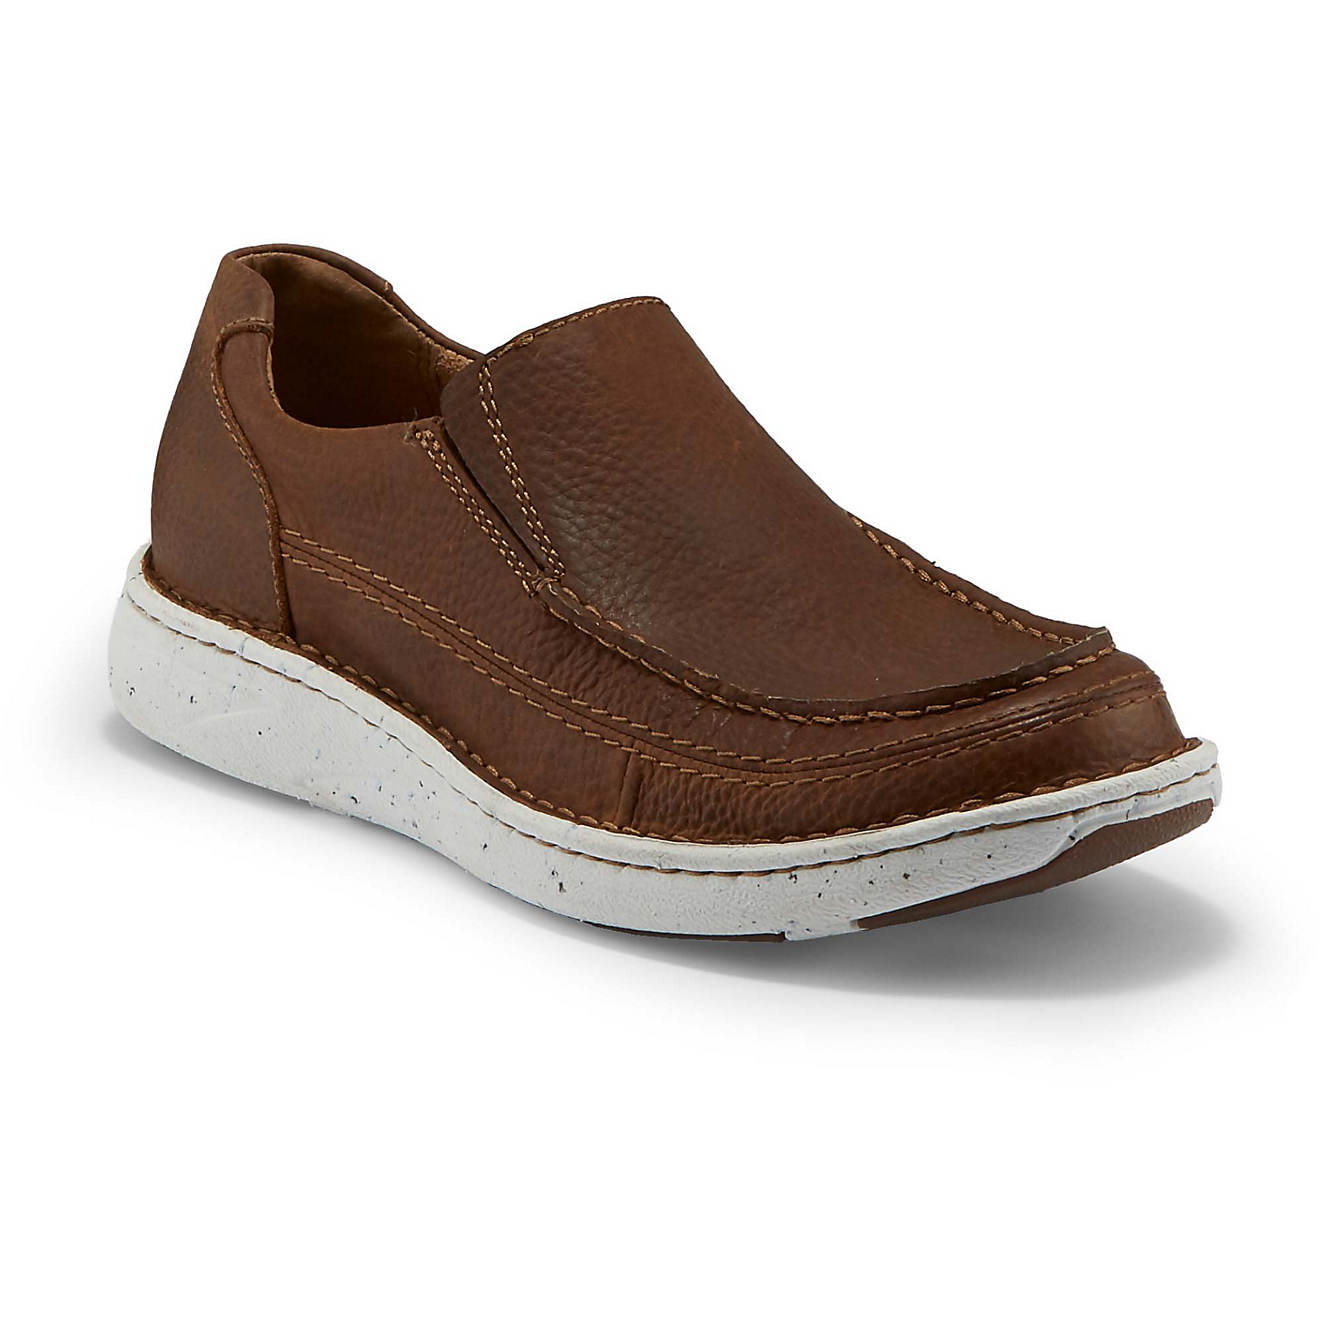 Justin Men's Looper Casual Shoes | Free Shipping at Academy